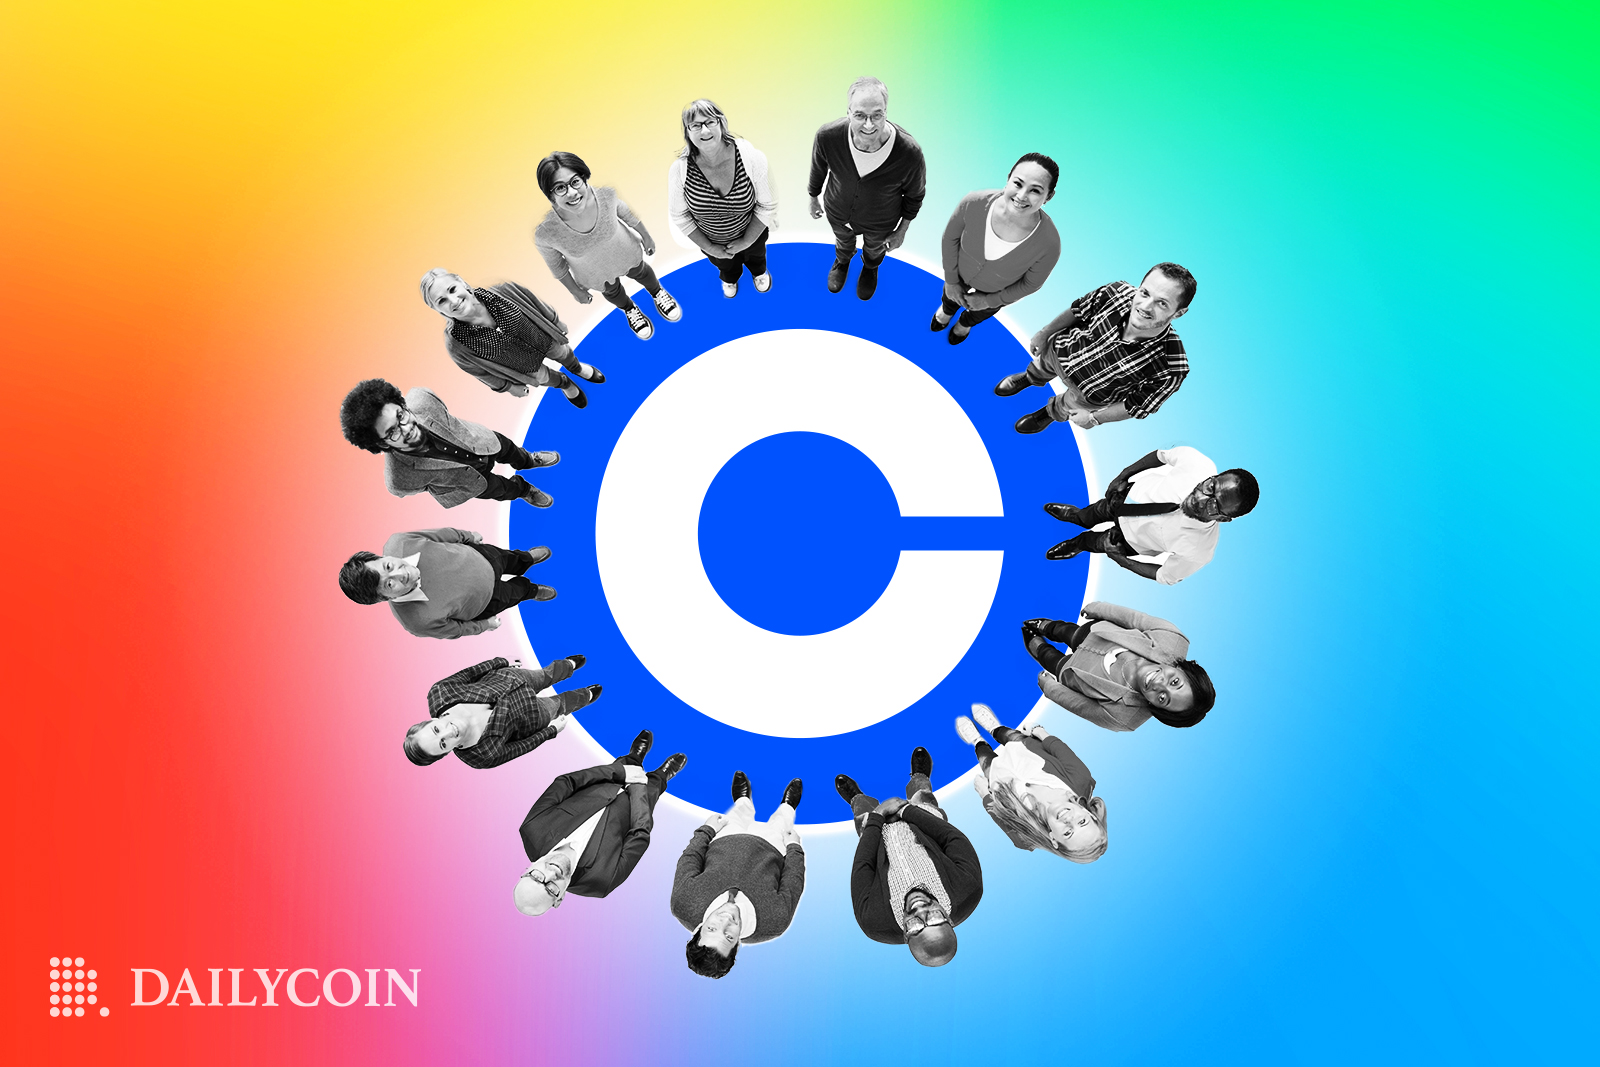 A circle of humans standing on Coinbase logo.